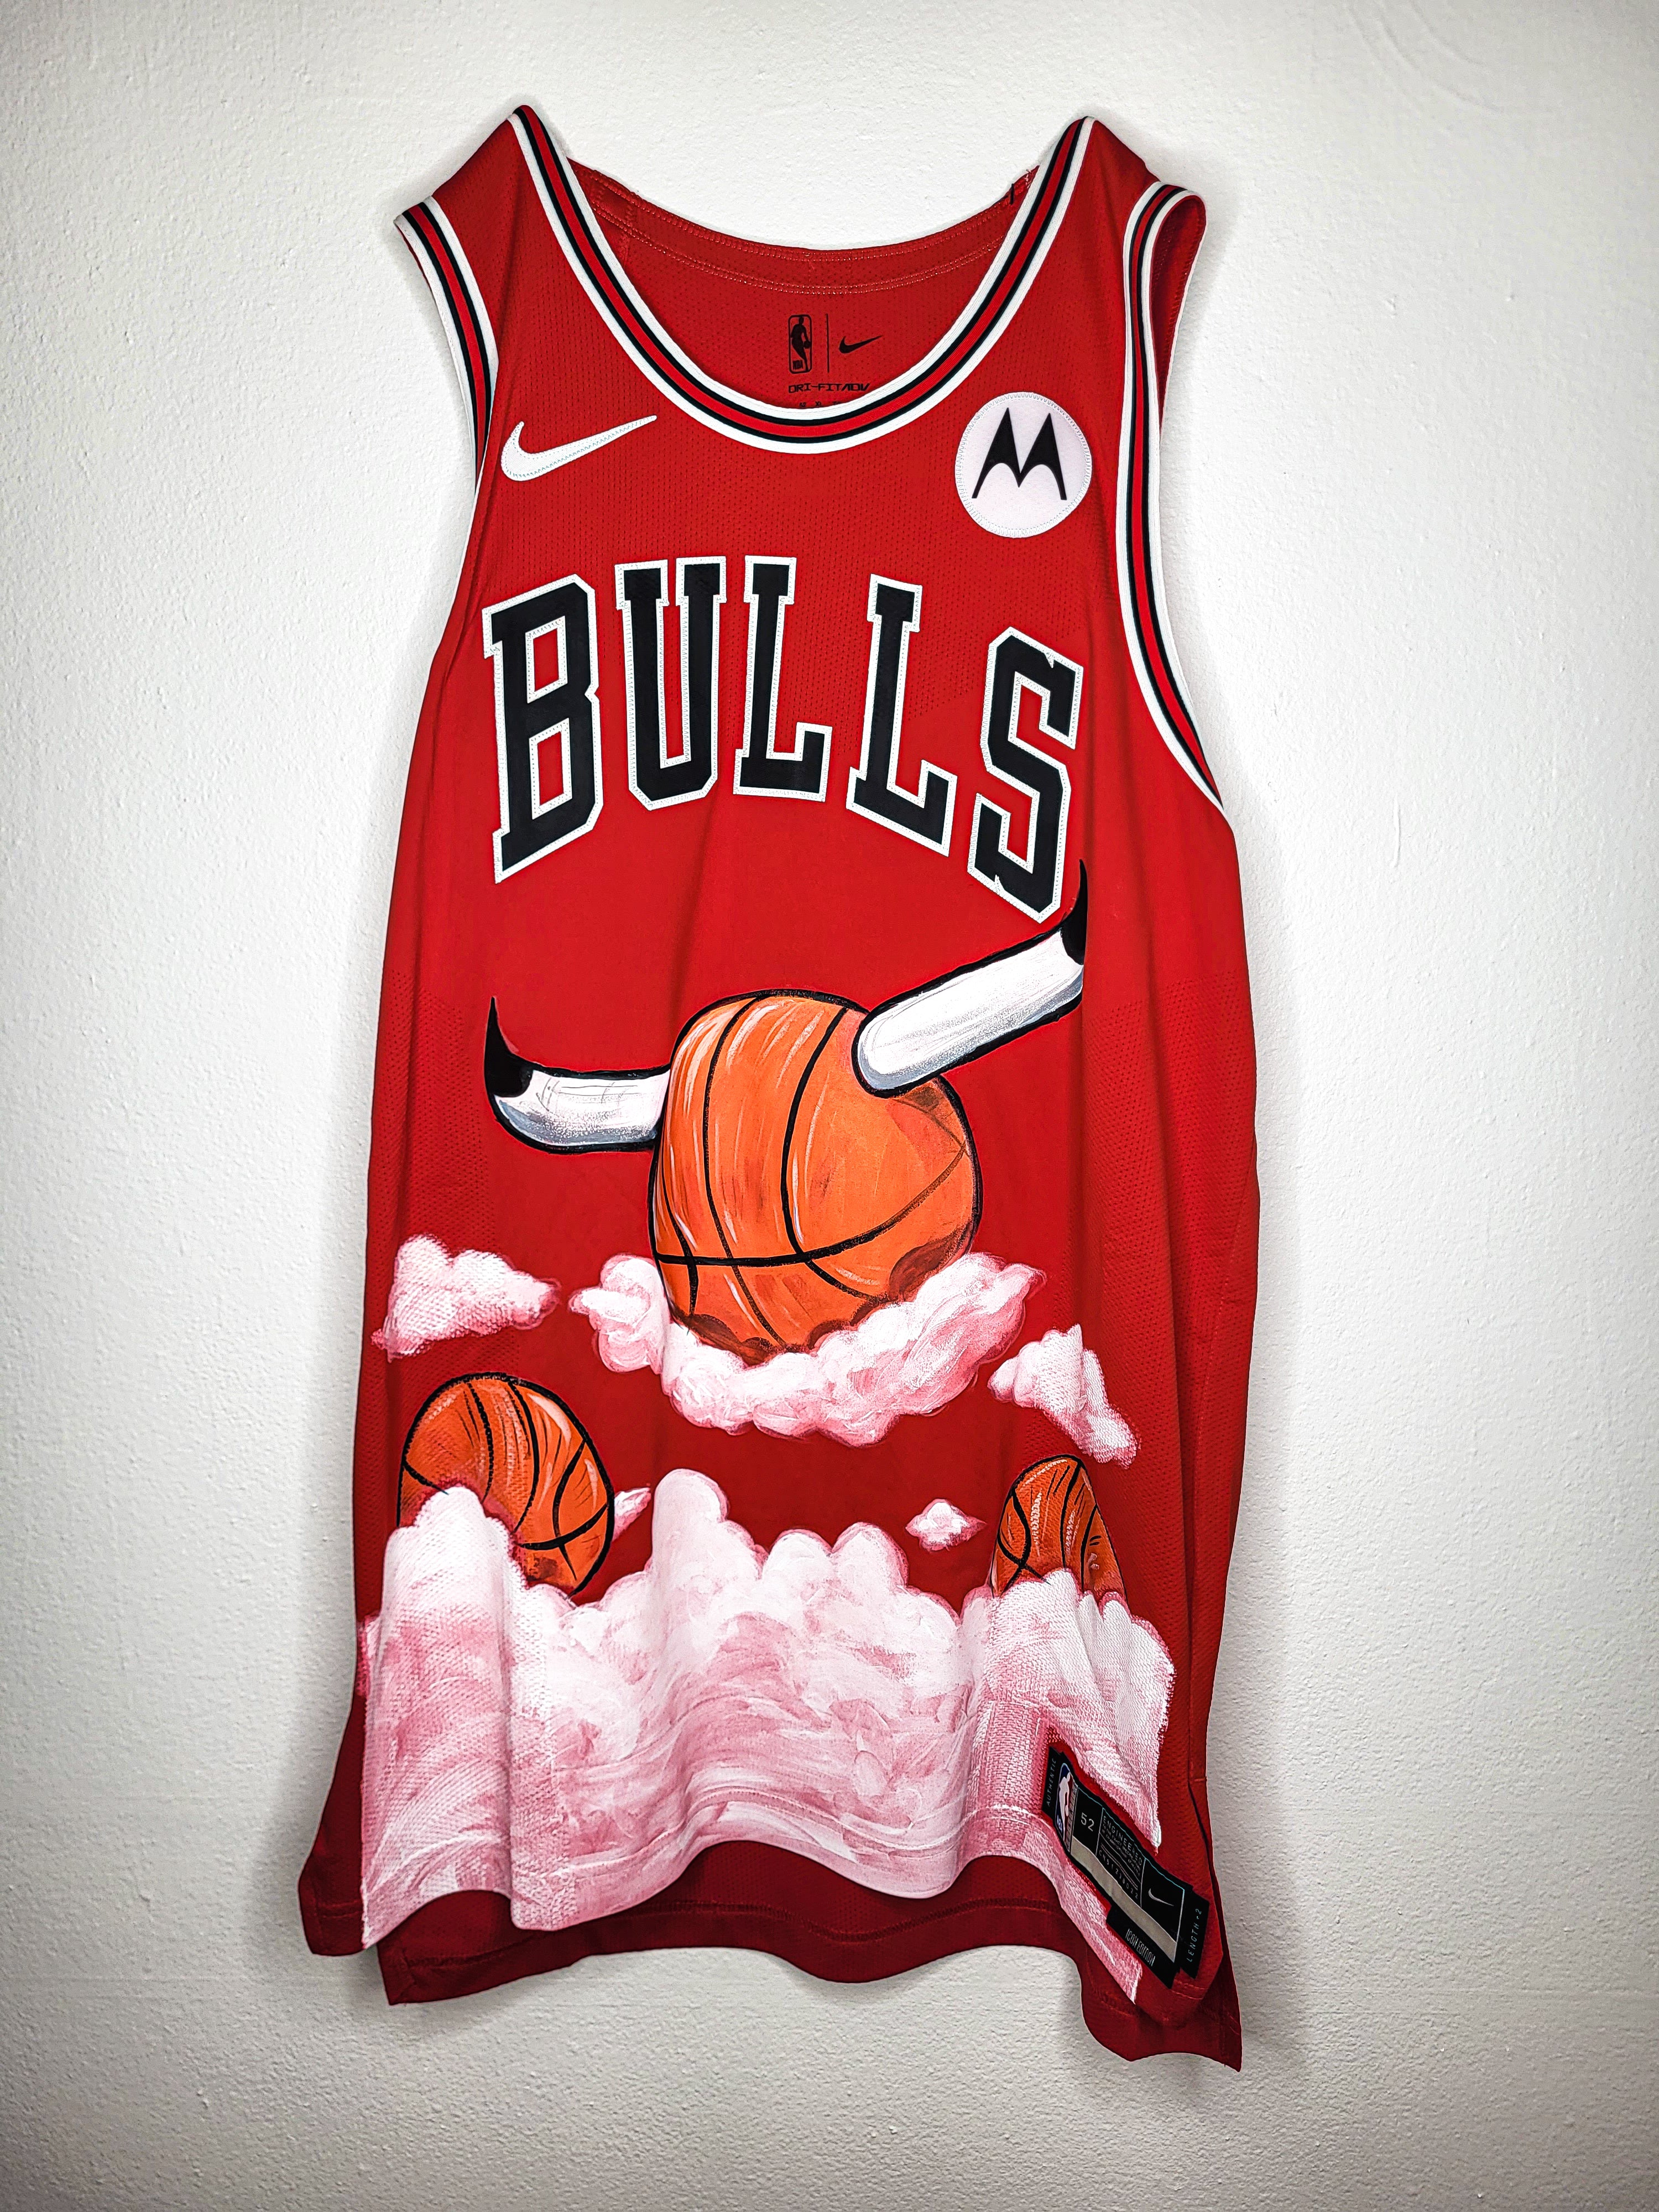 "Horned Player" Jersey by Morgan Nicolette